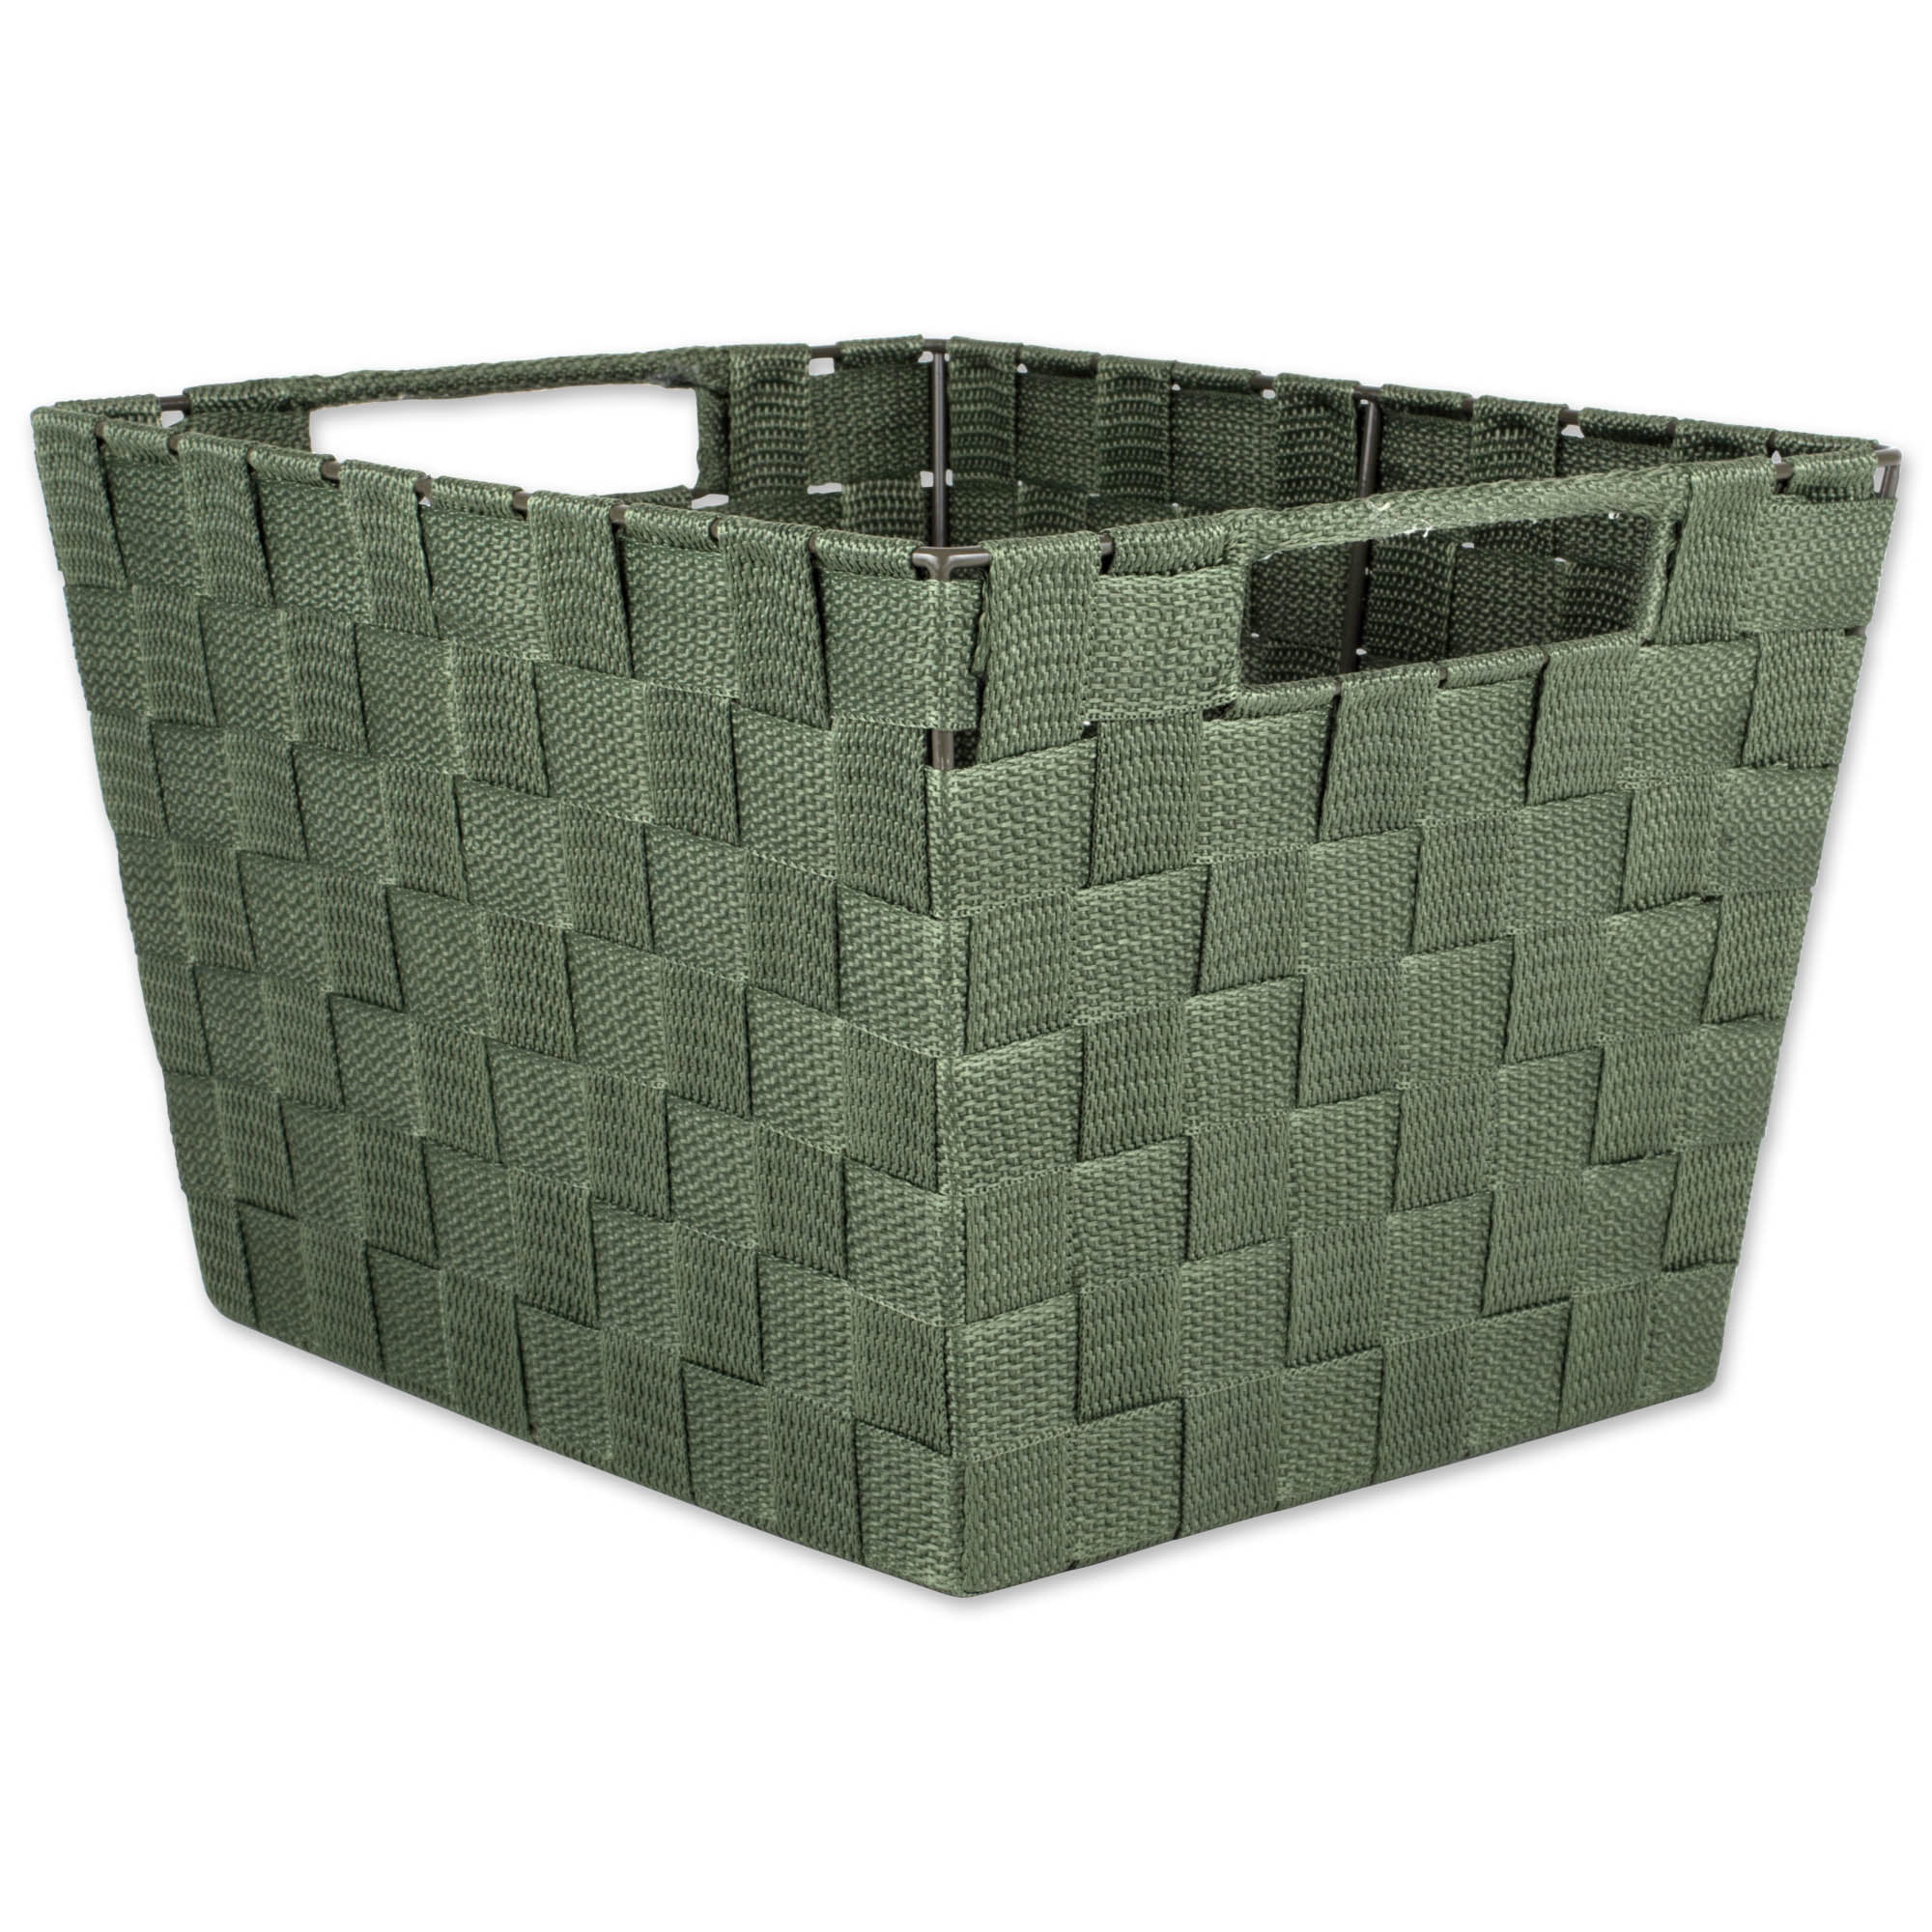 Details about   Storage Baskets Stackable Woven Paper Rope Bin Box For Makeup Closet Room 4 Pcs 